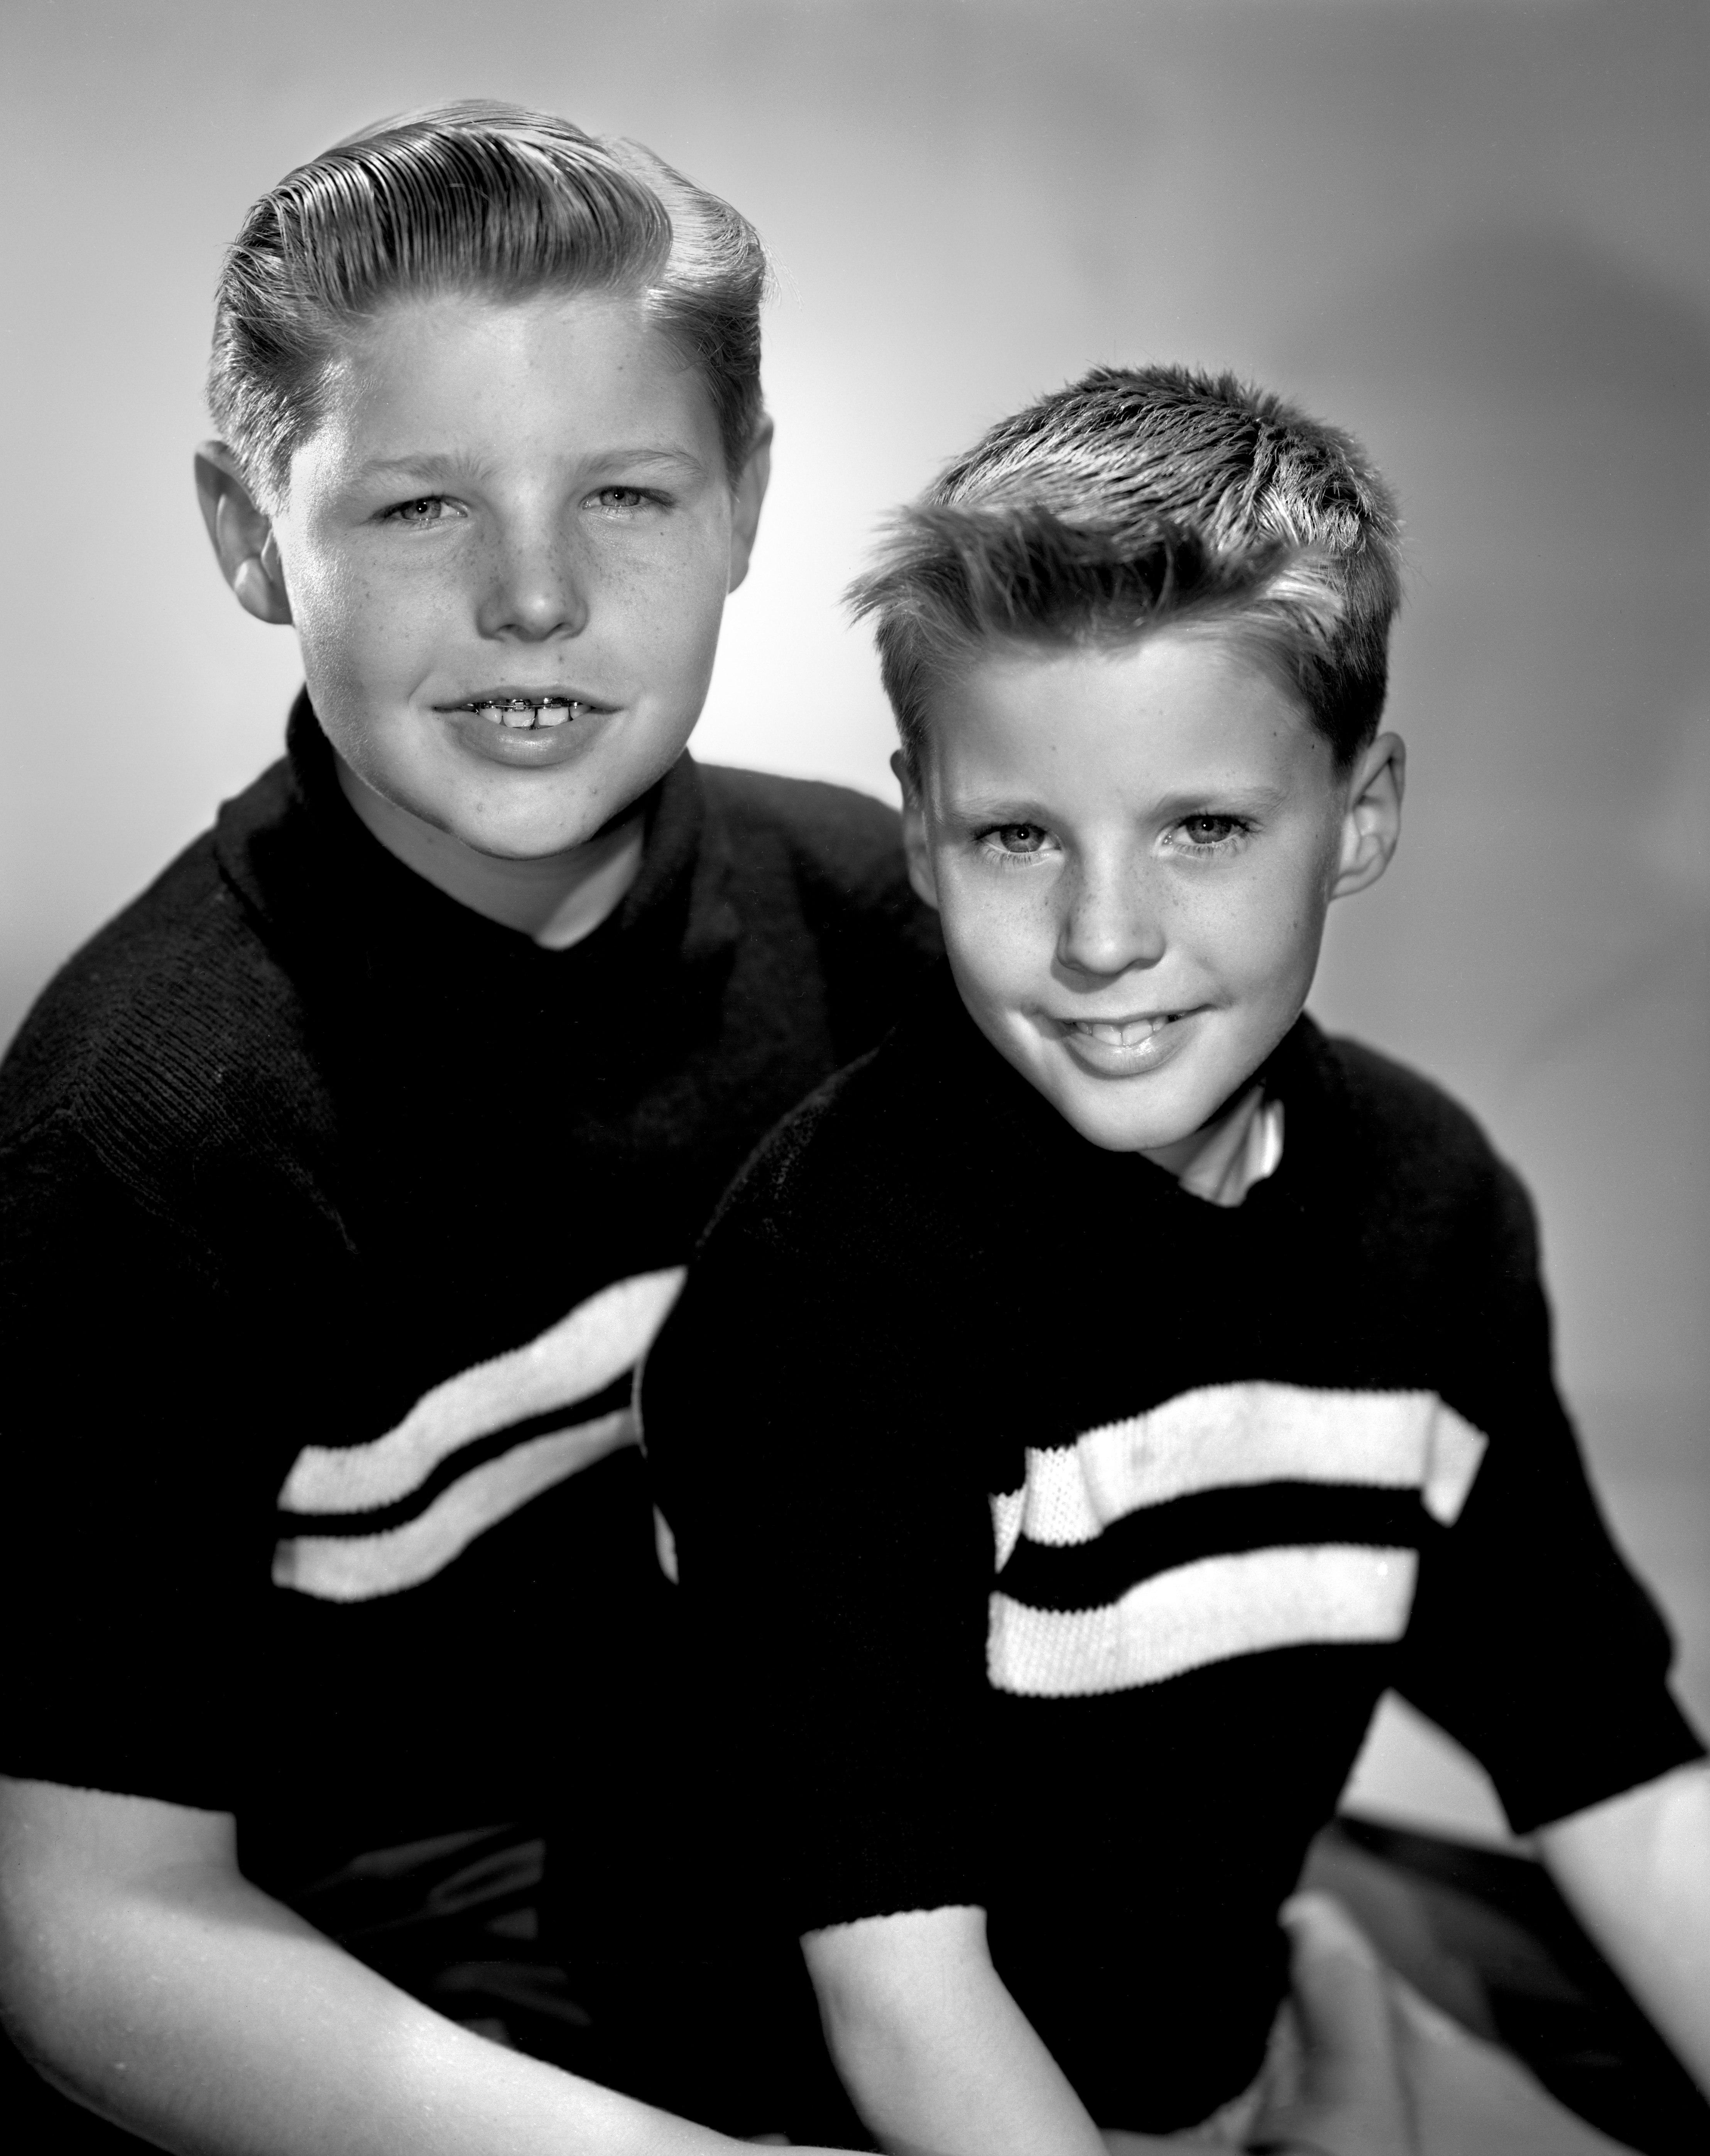 David and Ricky Nelson in Hollywood, California. March 1, 1949. | Source: Getty Images